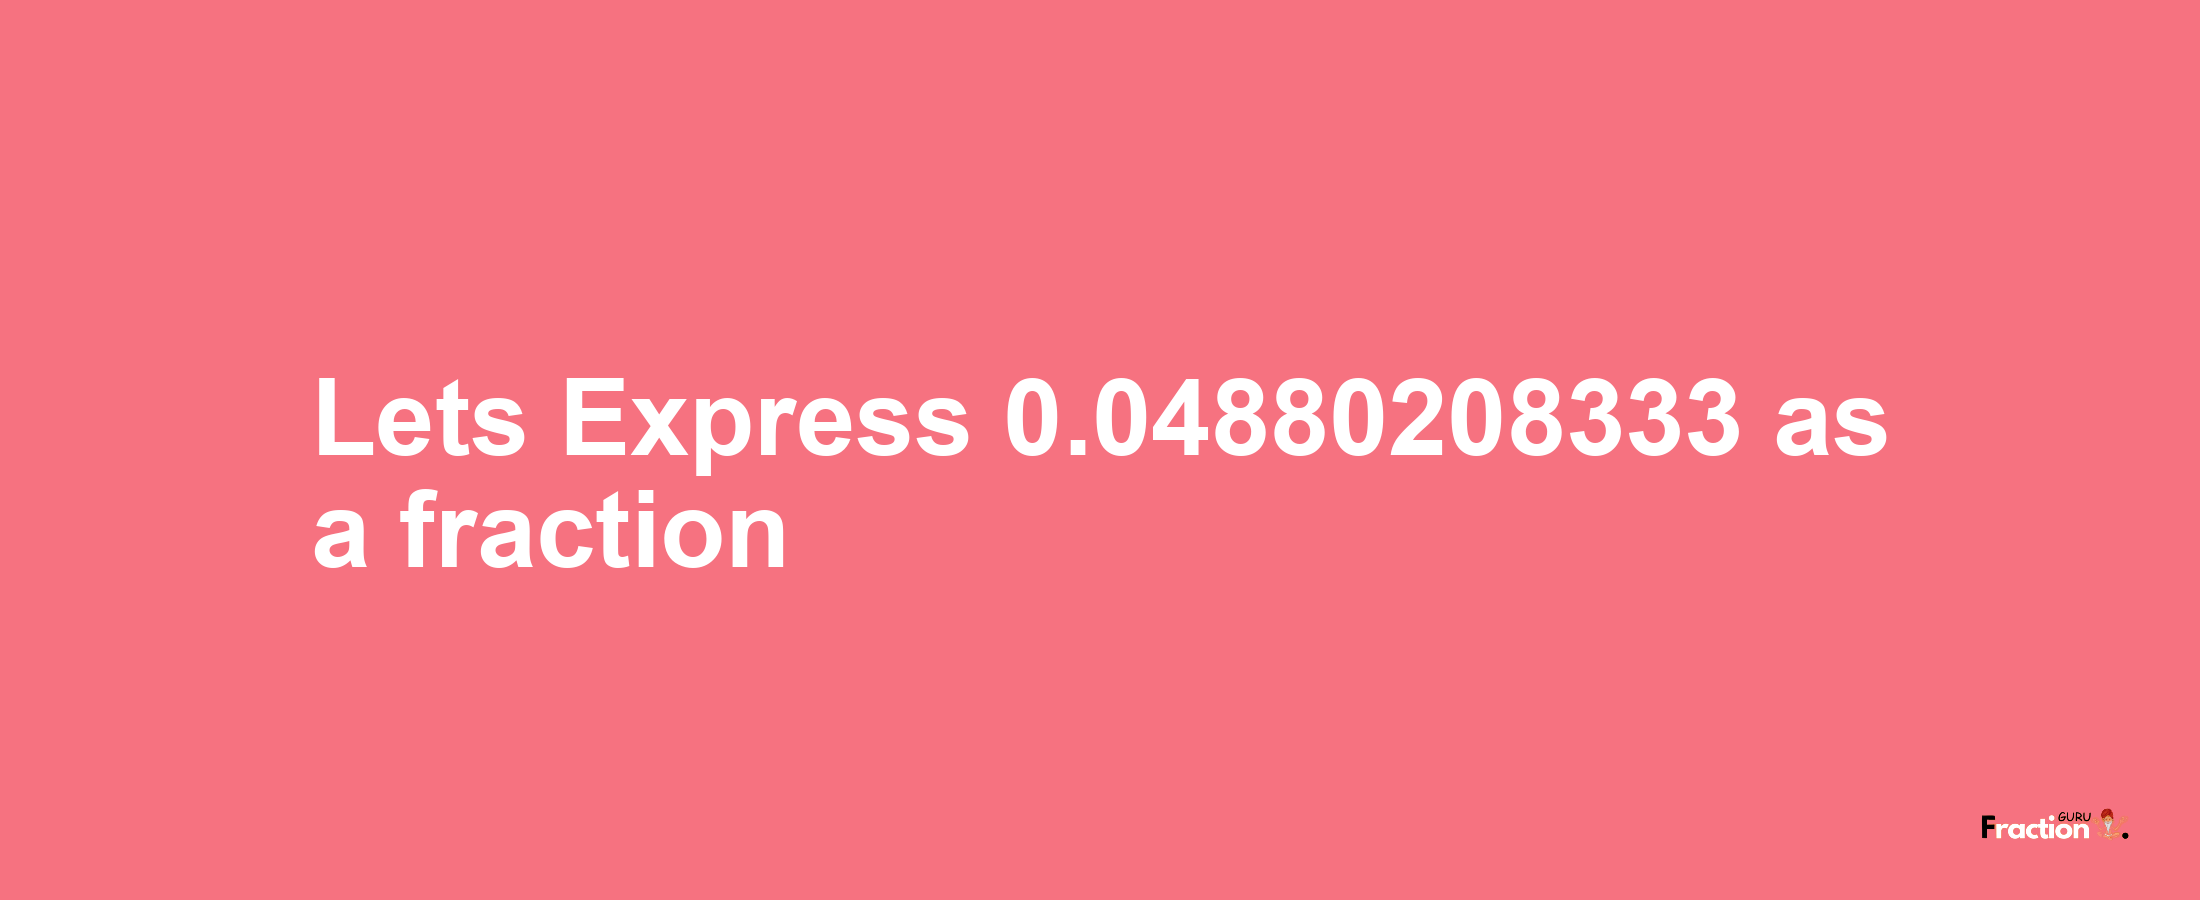 Lets Express 0.04880208333 as afraction